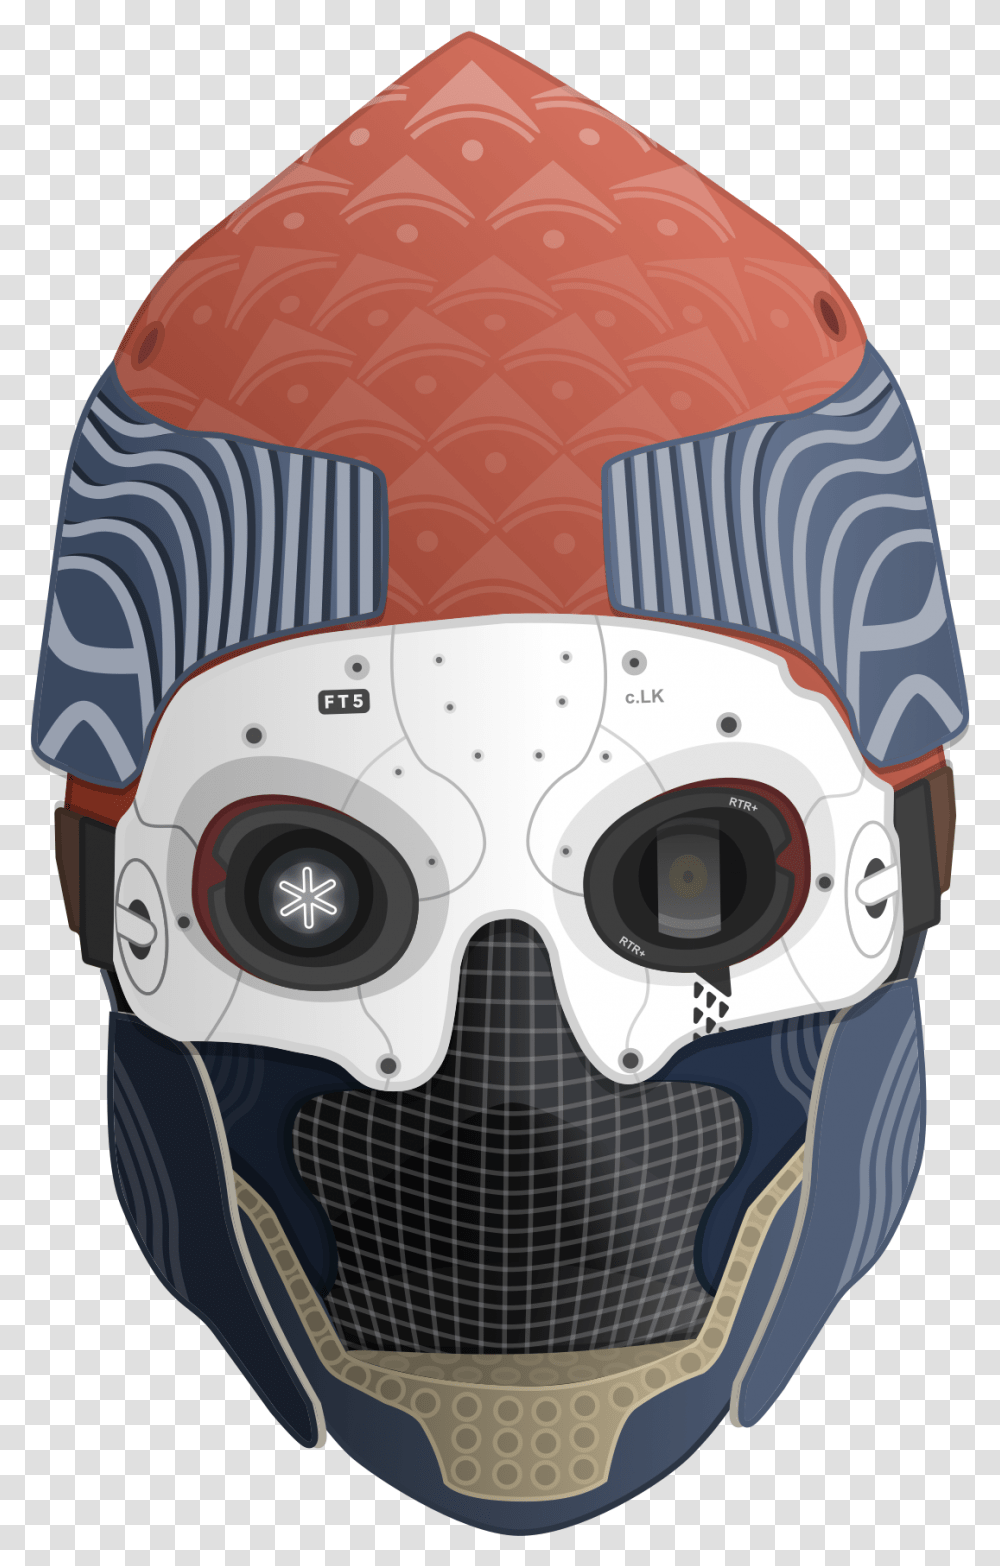 Destiny 2 One Eye Mask, Goggles, Accessories, Accessory, Helmet Transparent Png